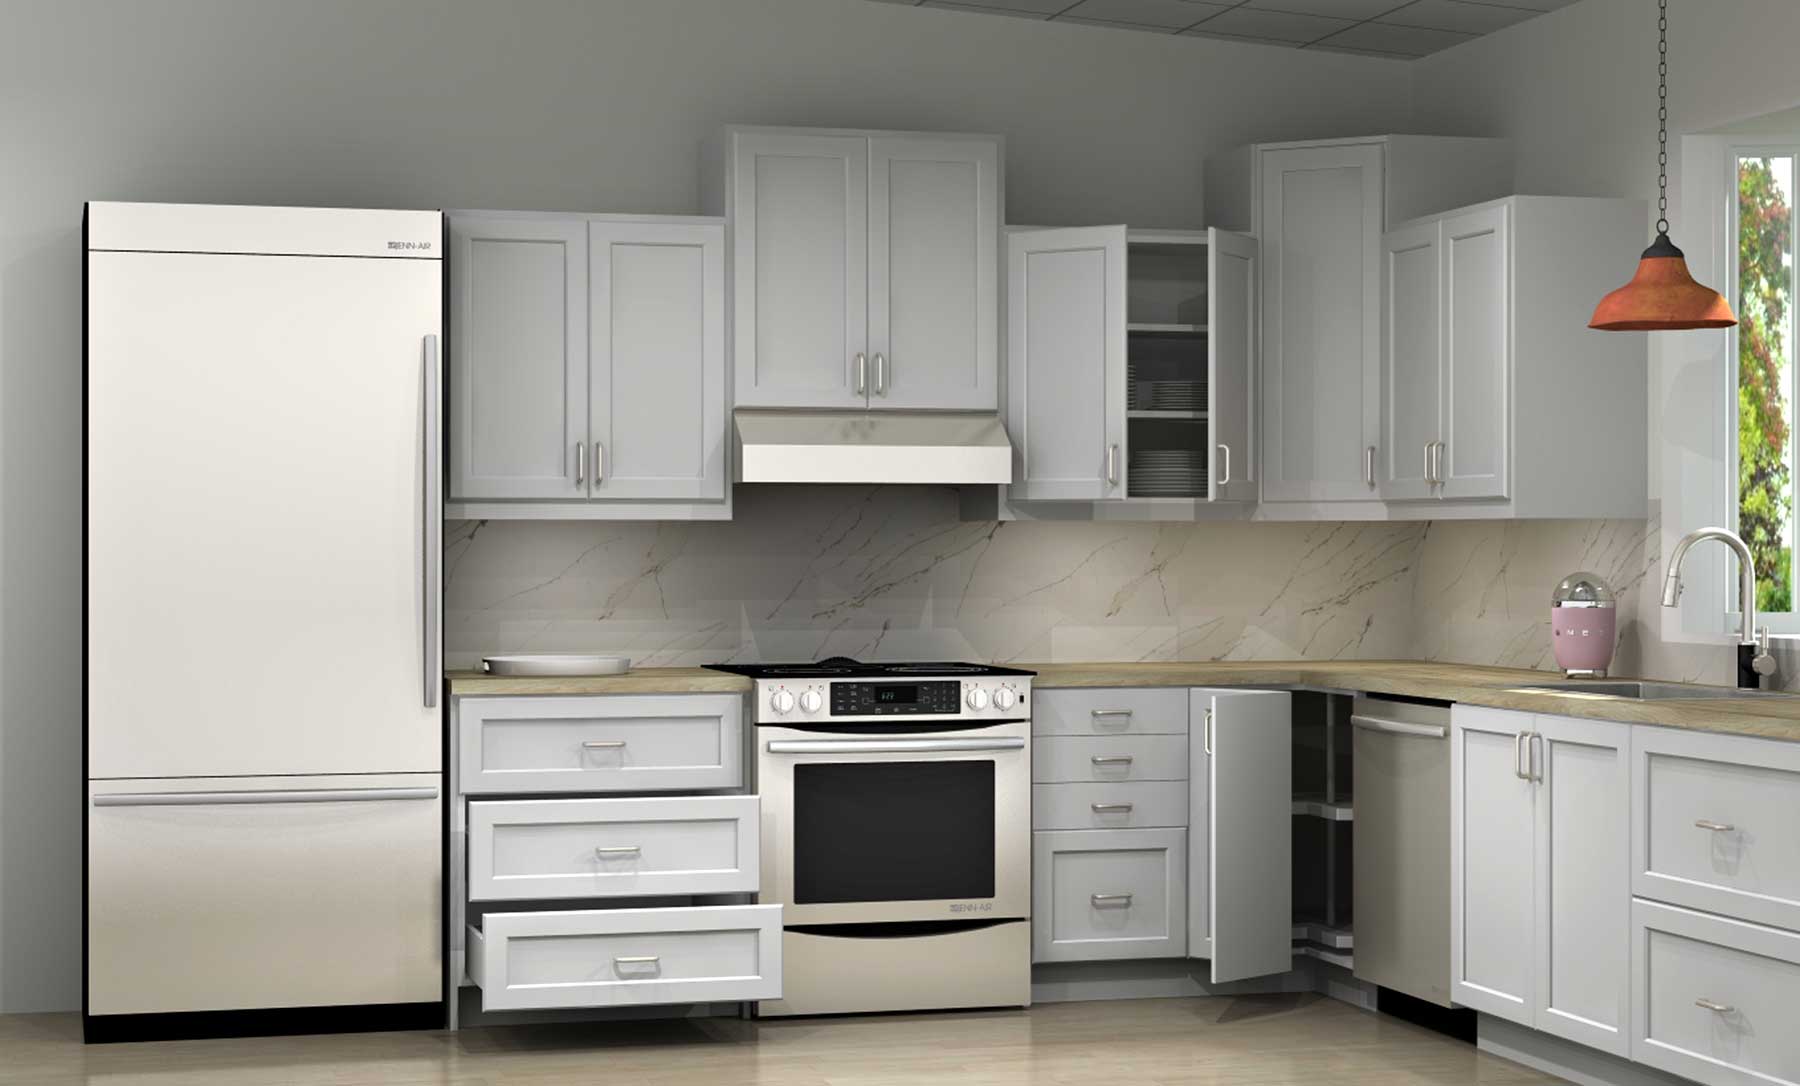 Using Diffe Wall Cabinet Heights In Your Kitchen